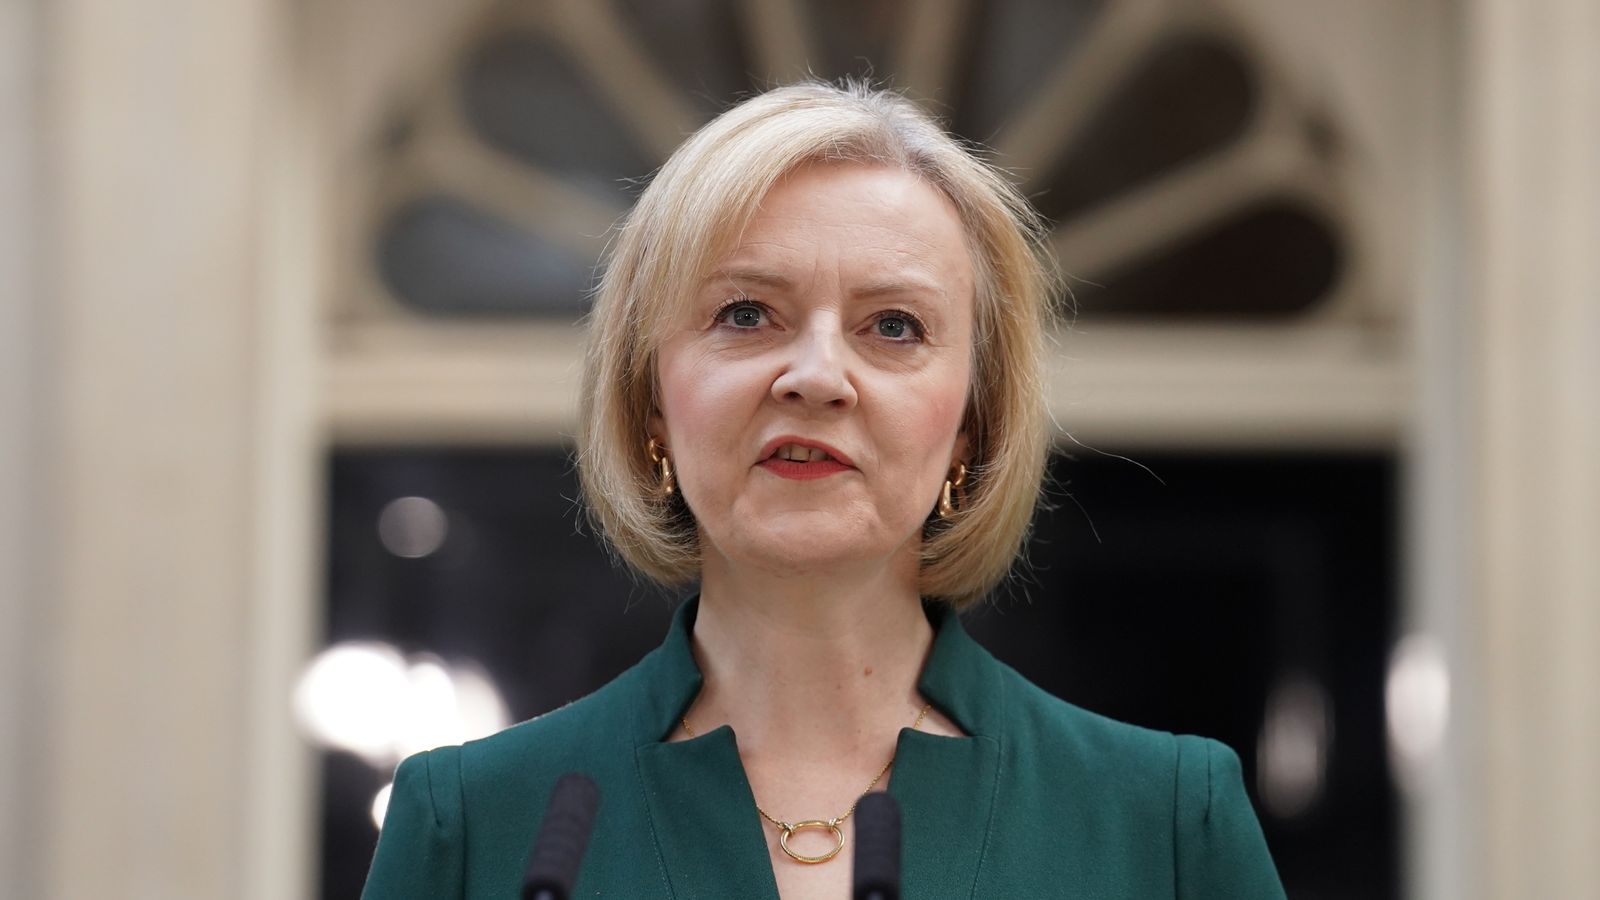 Liz Truss rules out future PM bid but 'doesn't regret' her short time in Downing Street